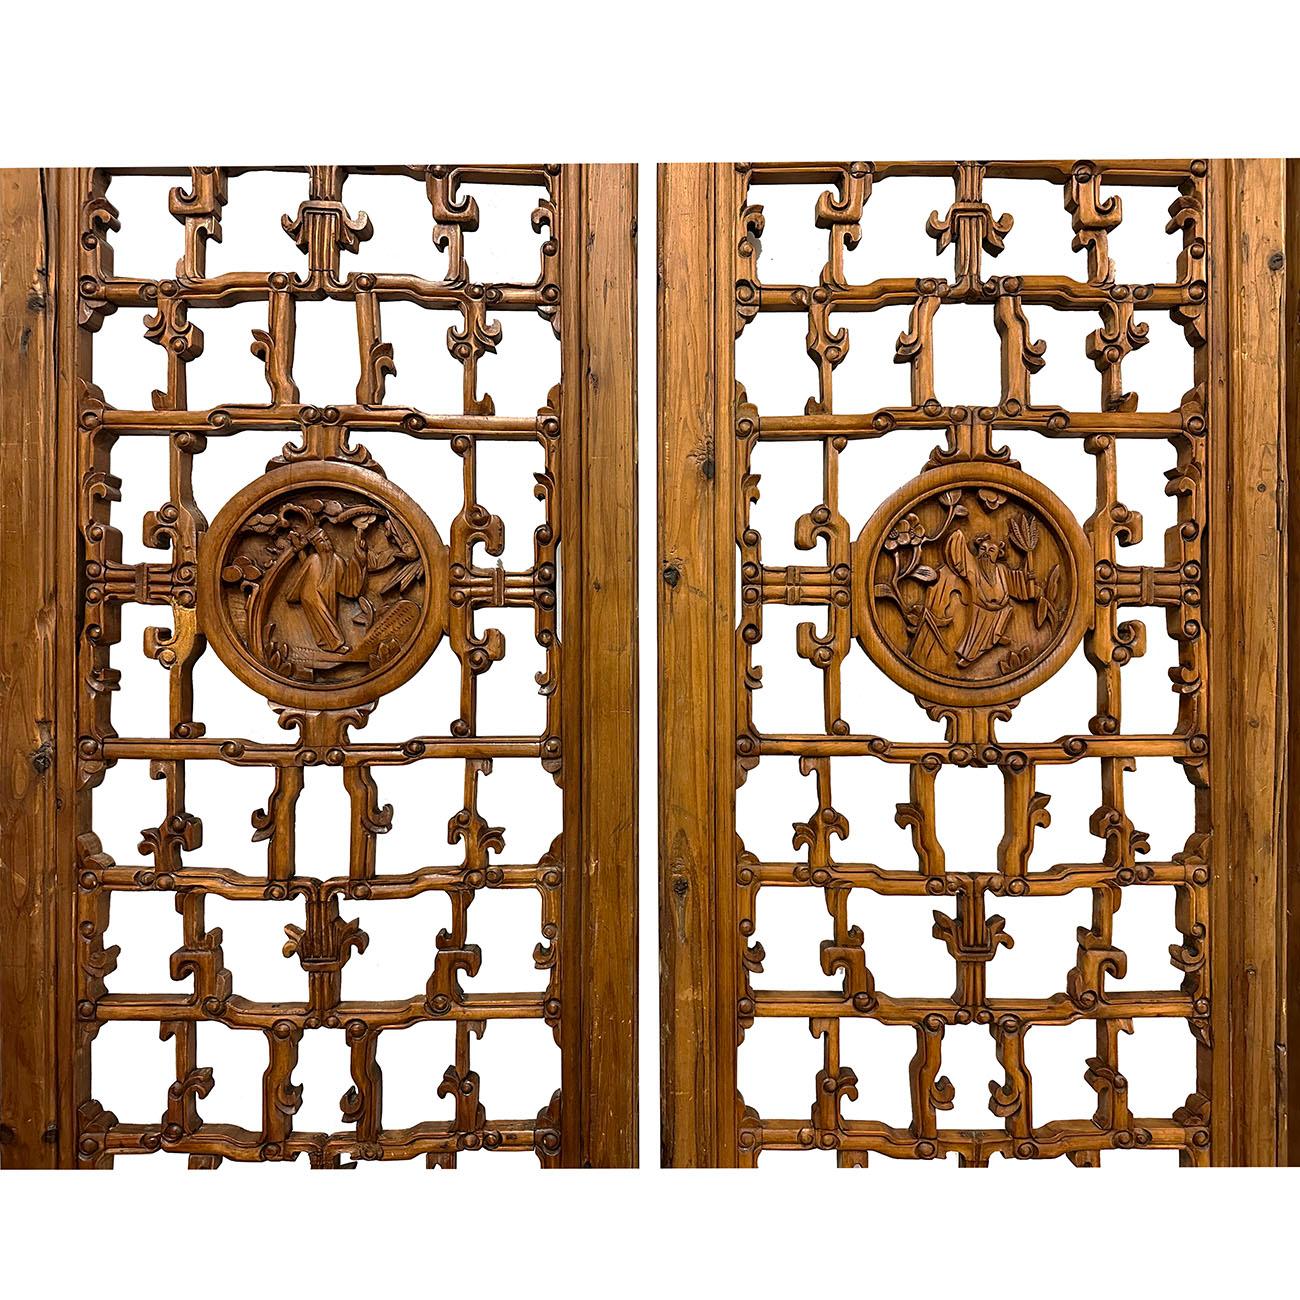 Chinese Export Late 19th Century Antique Chinese Hand Carved 6 Panels Wooden Screen/Room Divide